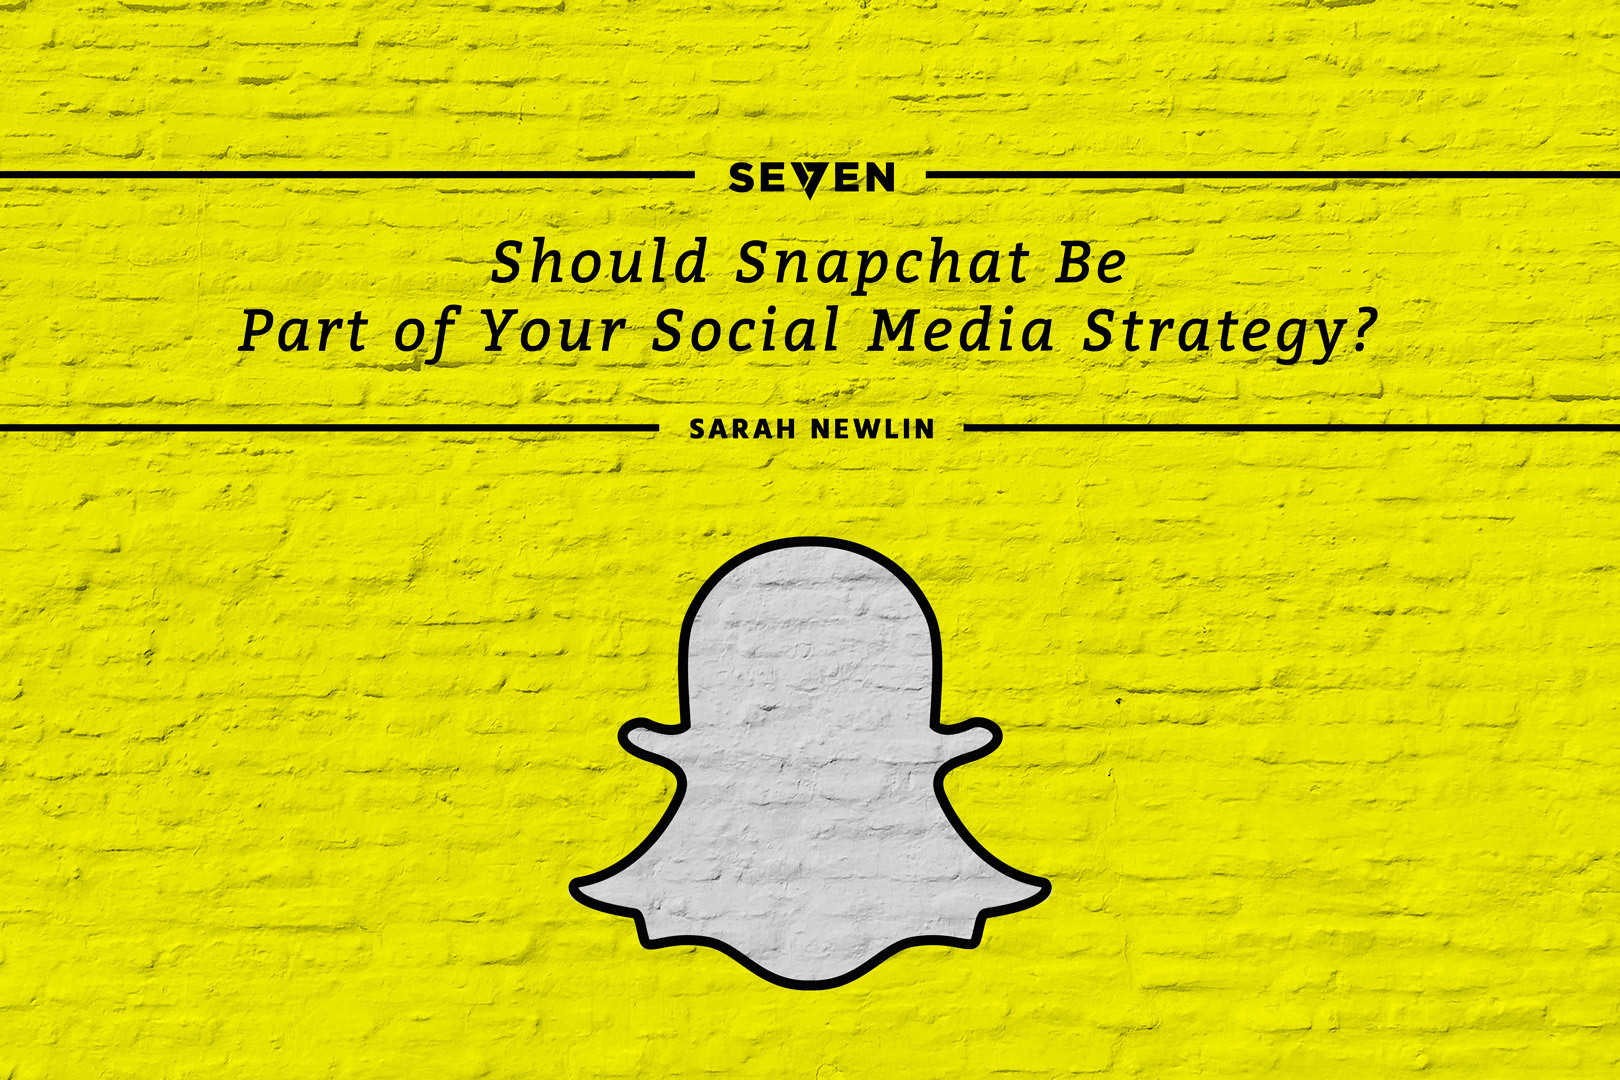 Should Snapchat be Part of Your Social Media Strategy?